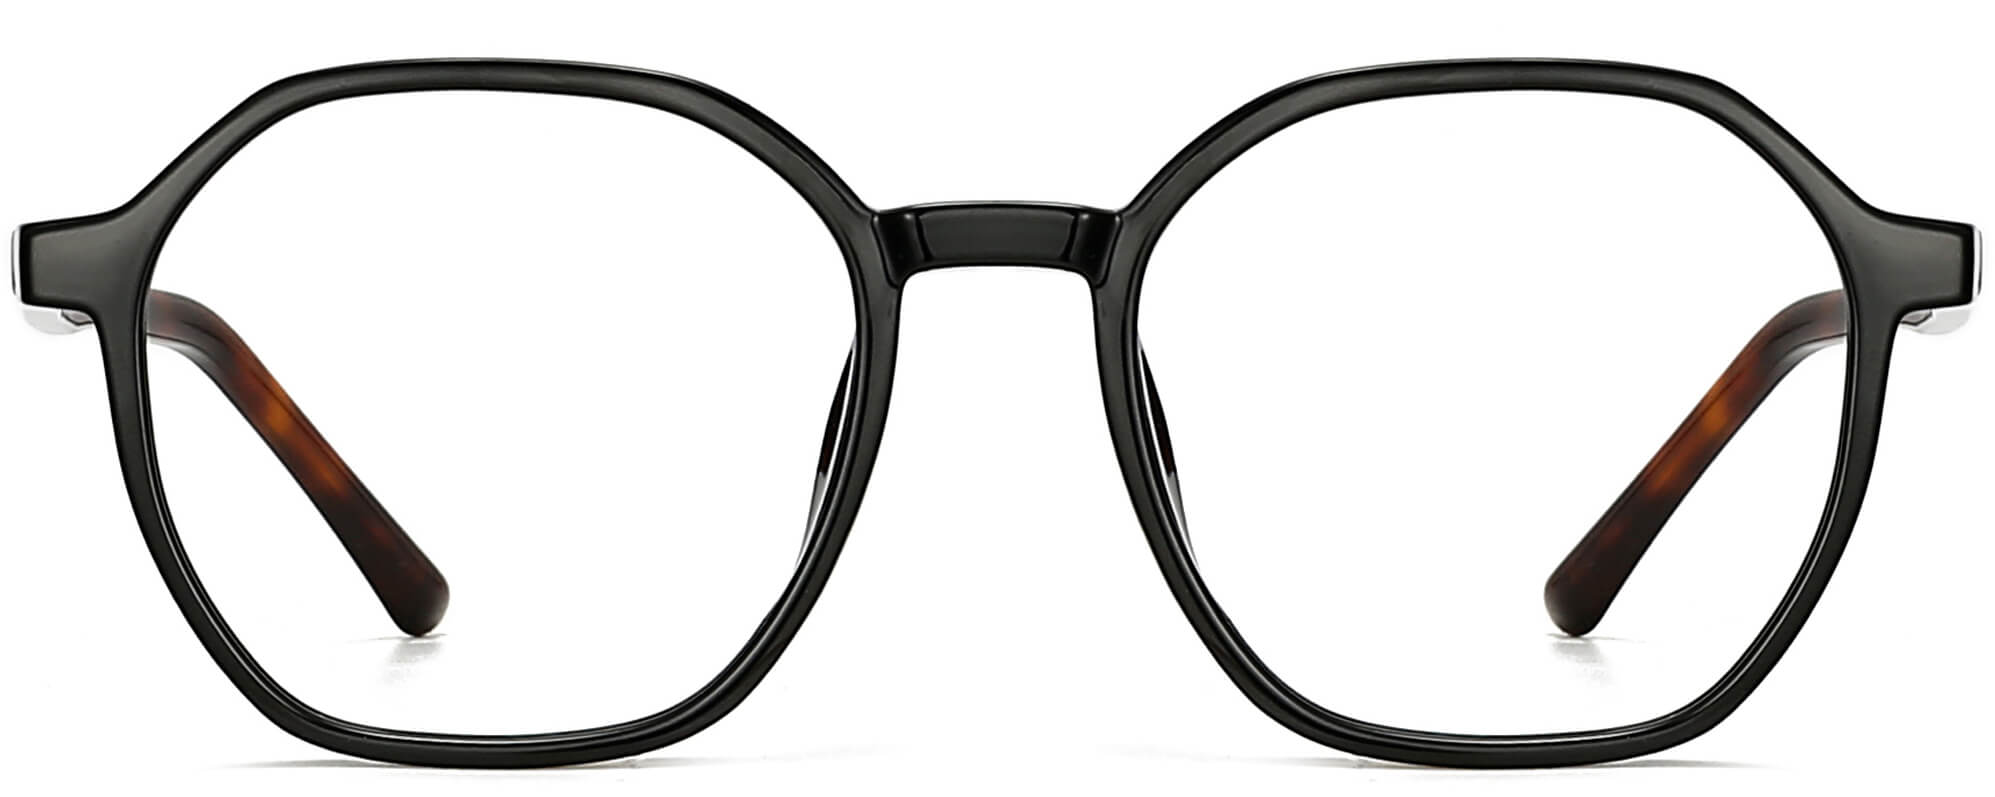 Archie Geometric Black Eyeglasses from ANRRI, front view